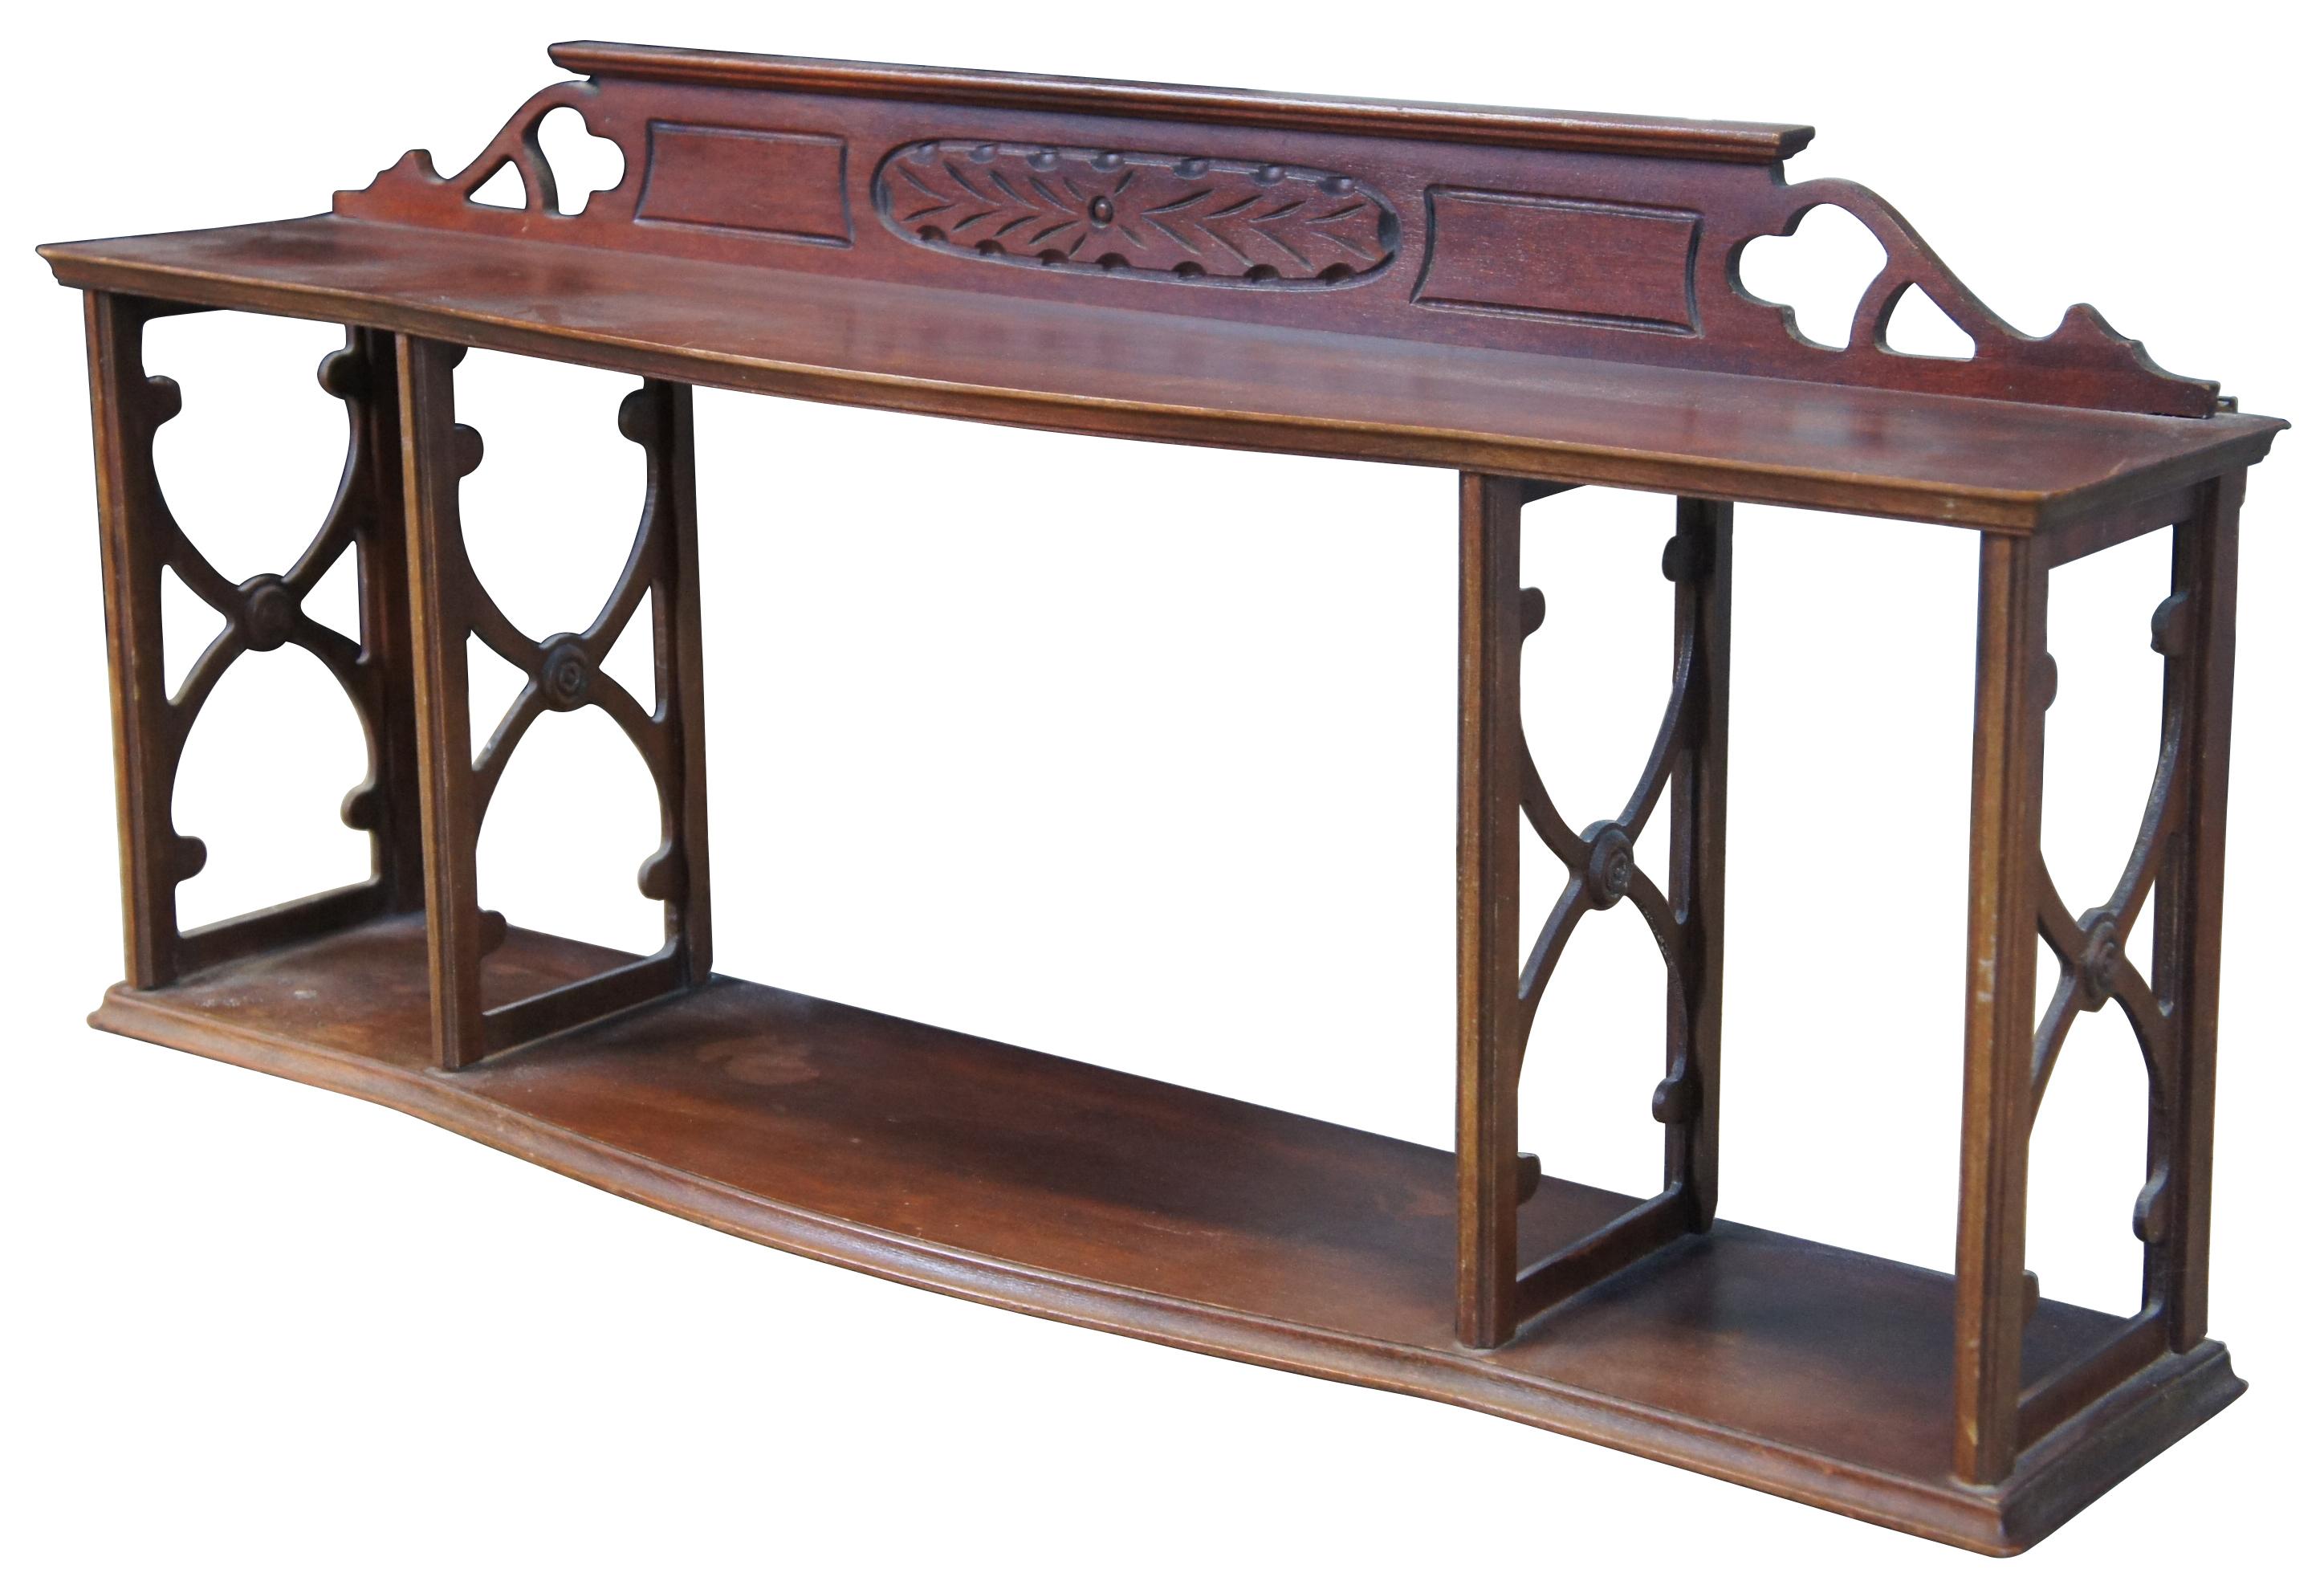 Mid-20th century serpentine wall hanging shelf. Made from mahogany with an open frame featuring x shaped fretwork and pierced backsplash. Includes button shaped medallions and a carved backsplash. 

Measures: 29.75